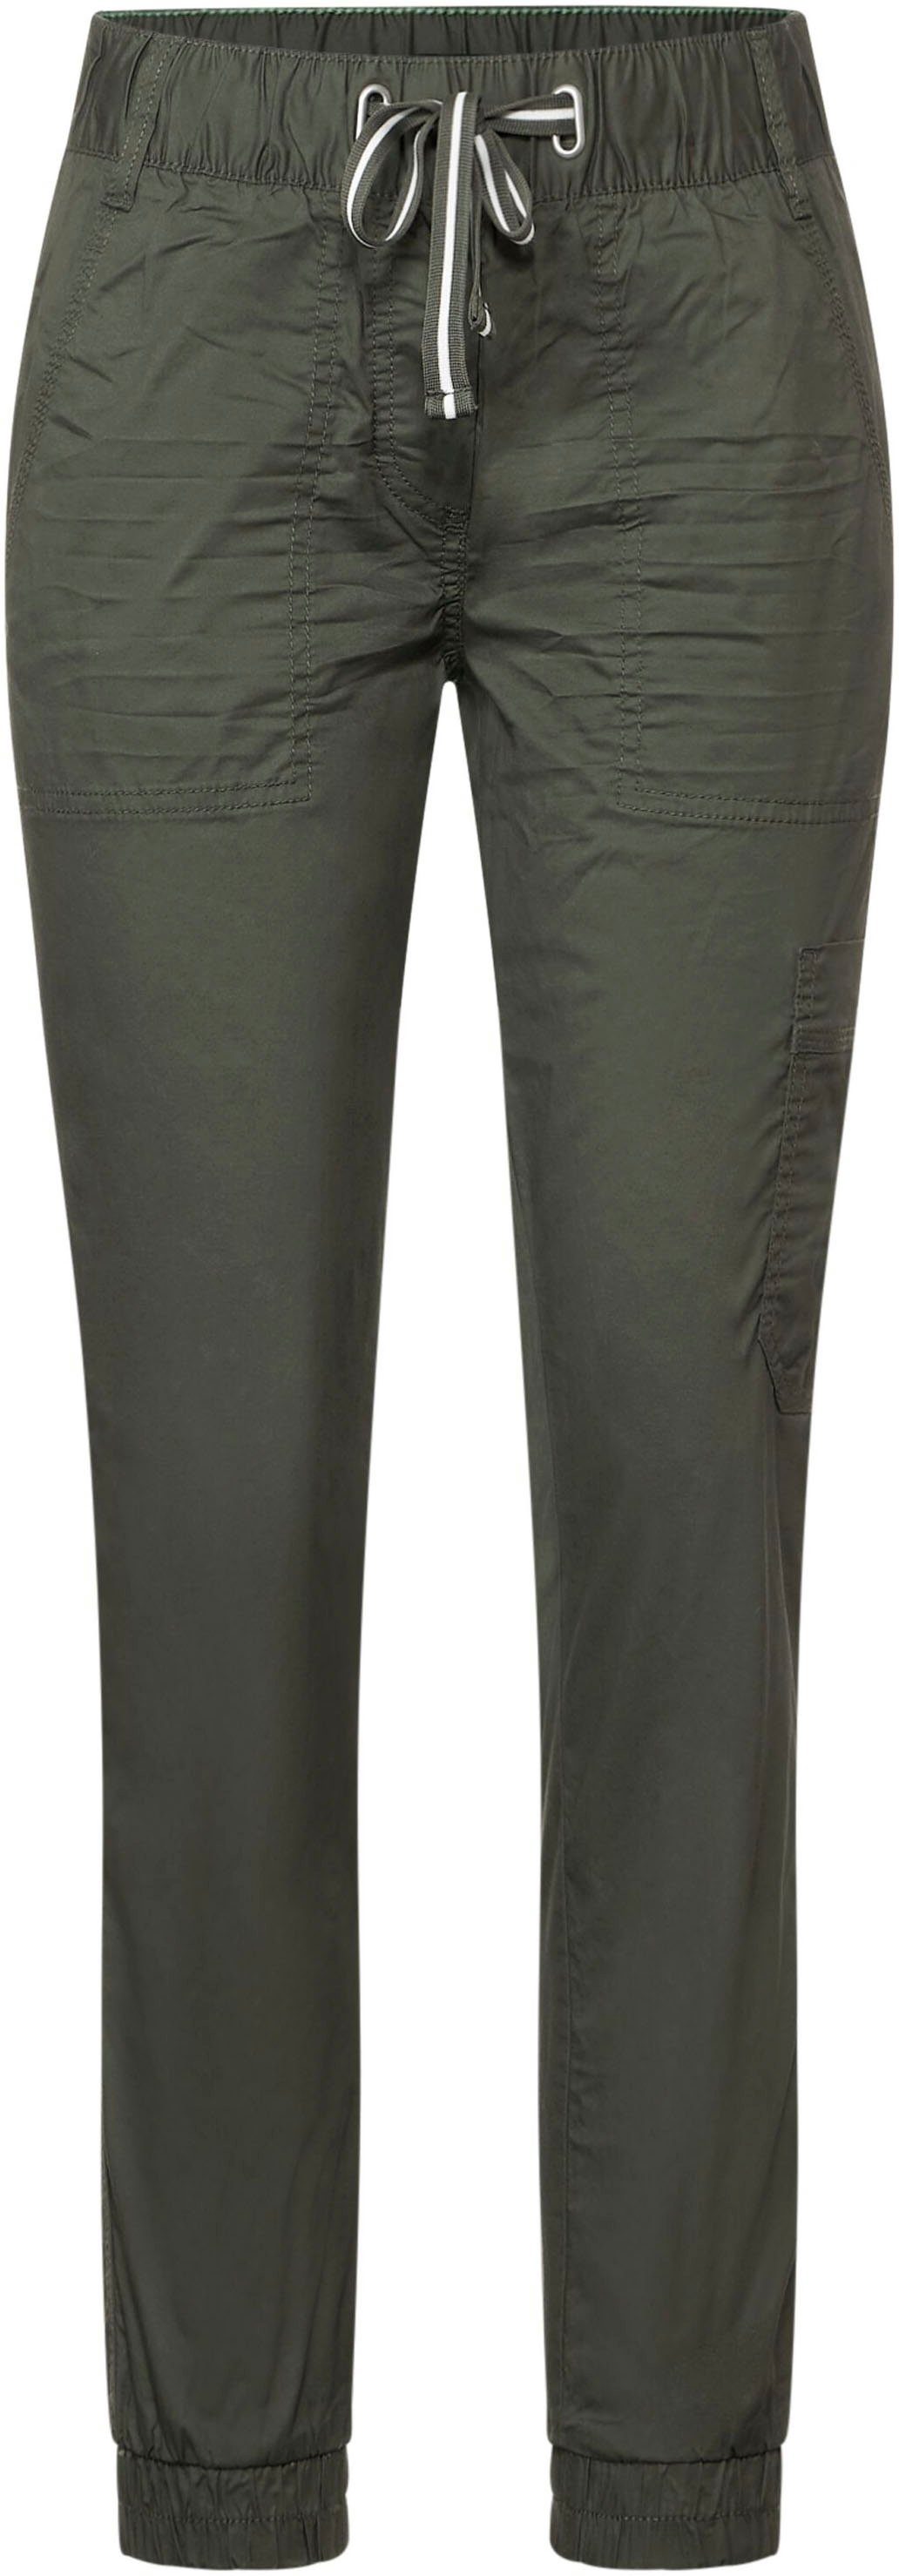 Tracey im khaki Cecil Outdoorhose Style sporty